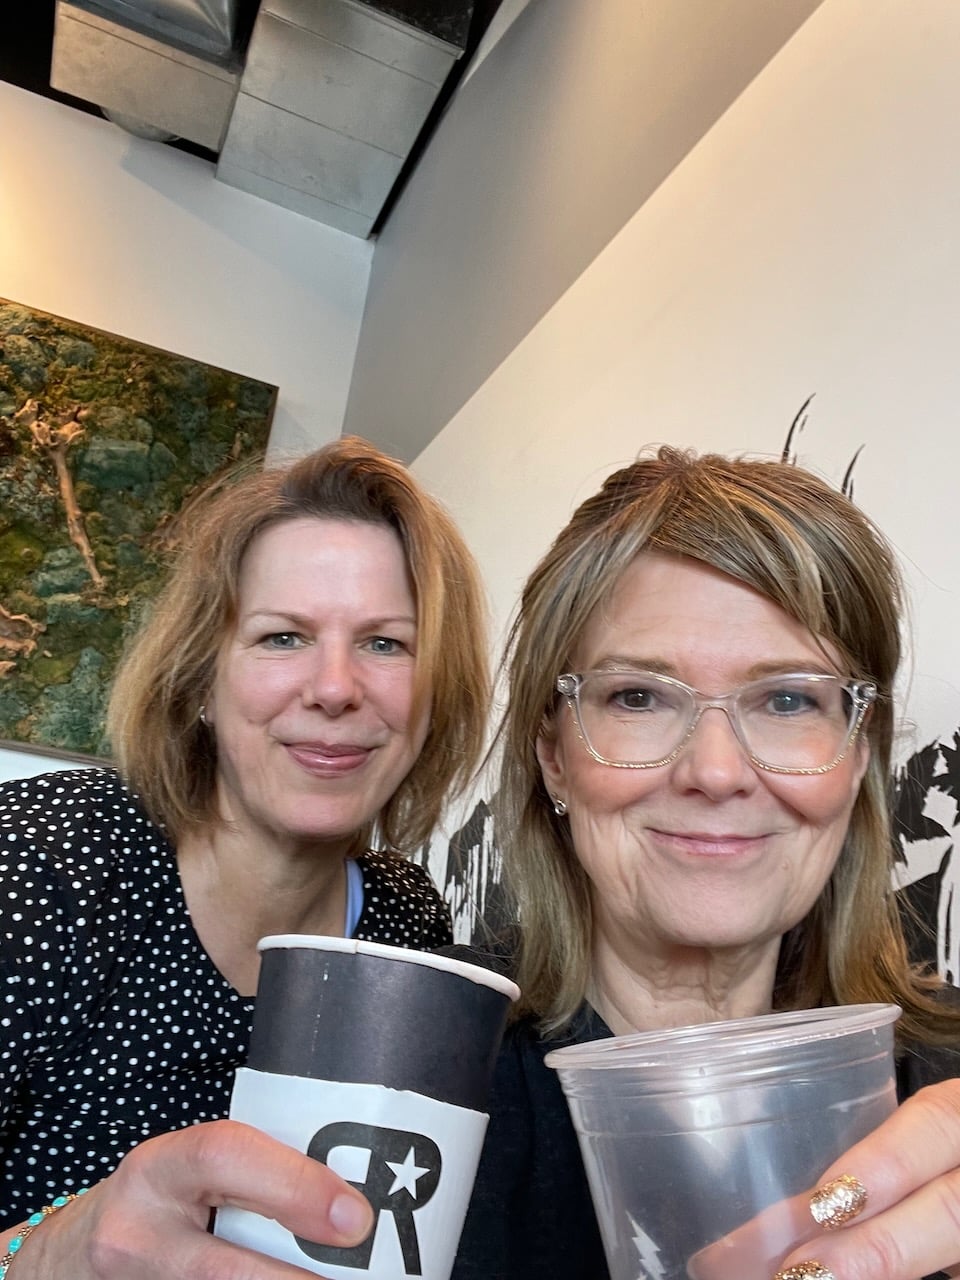 Marly and her cousin Melanie pose with their coffee and tea cups at a coffee shop.